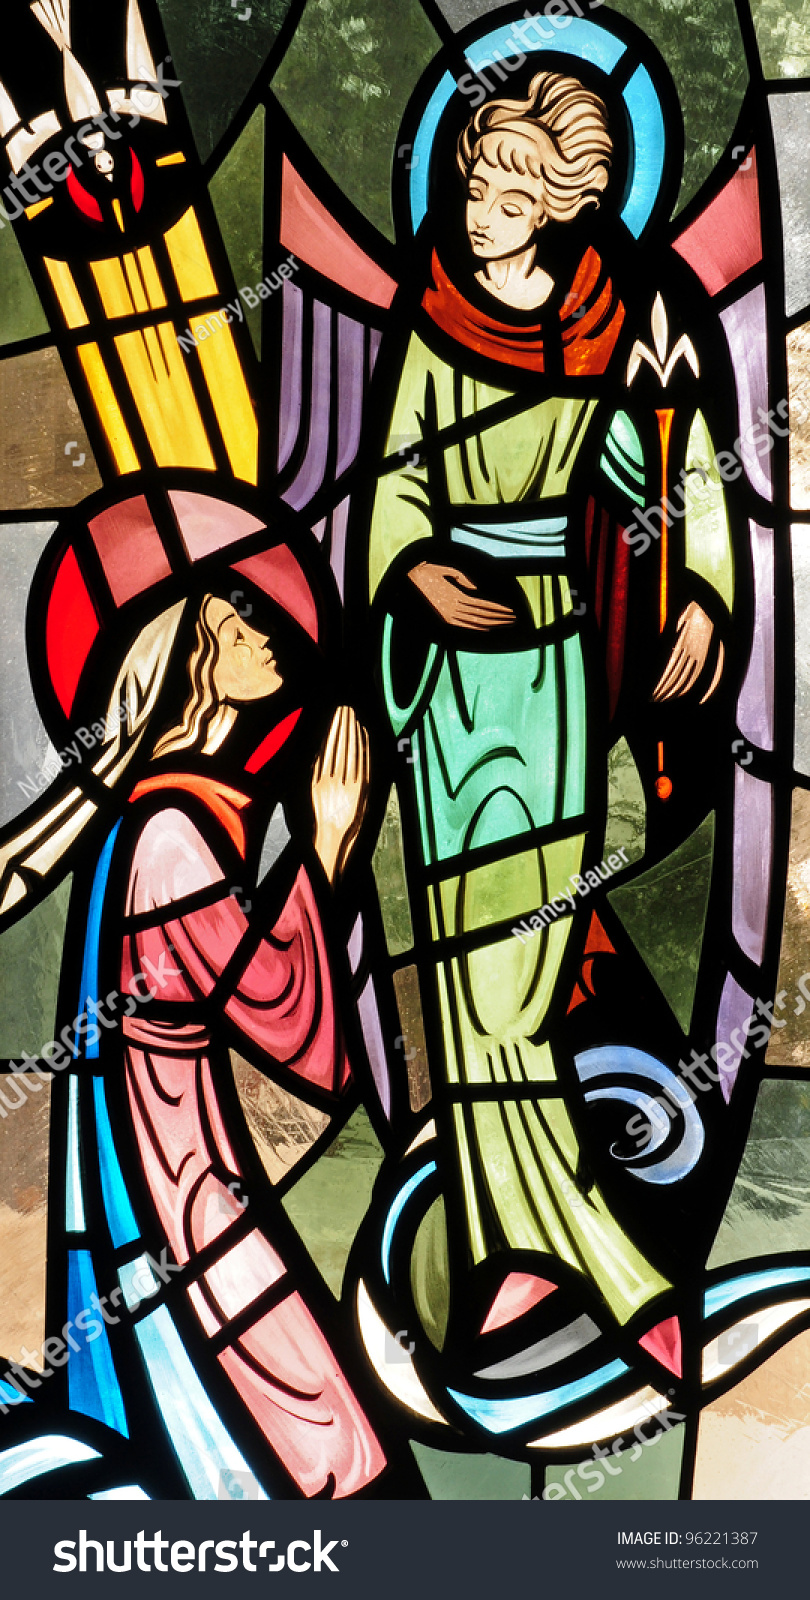 Stained Glass Window Of The Annunciation To Mary By The Angel Gabriel ...